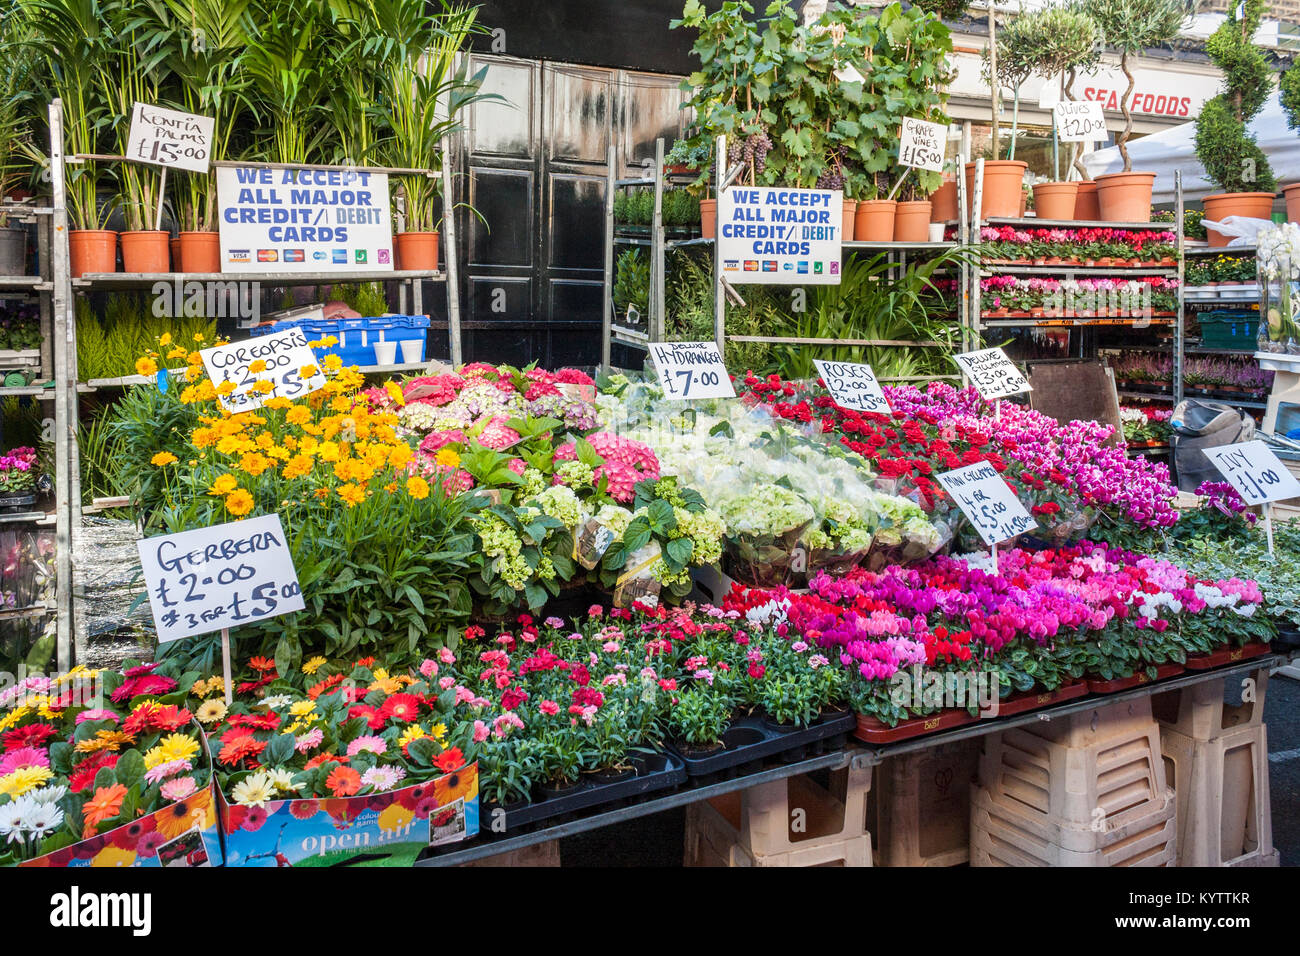 Columbia Road Flower Market Stall Without People, Columbia Road, Londra, Inghilterra, GB, REGNO UNITO Foto Stock